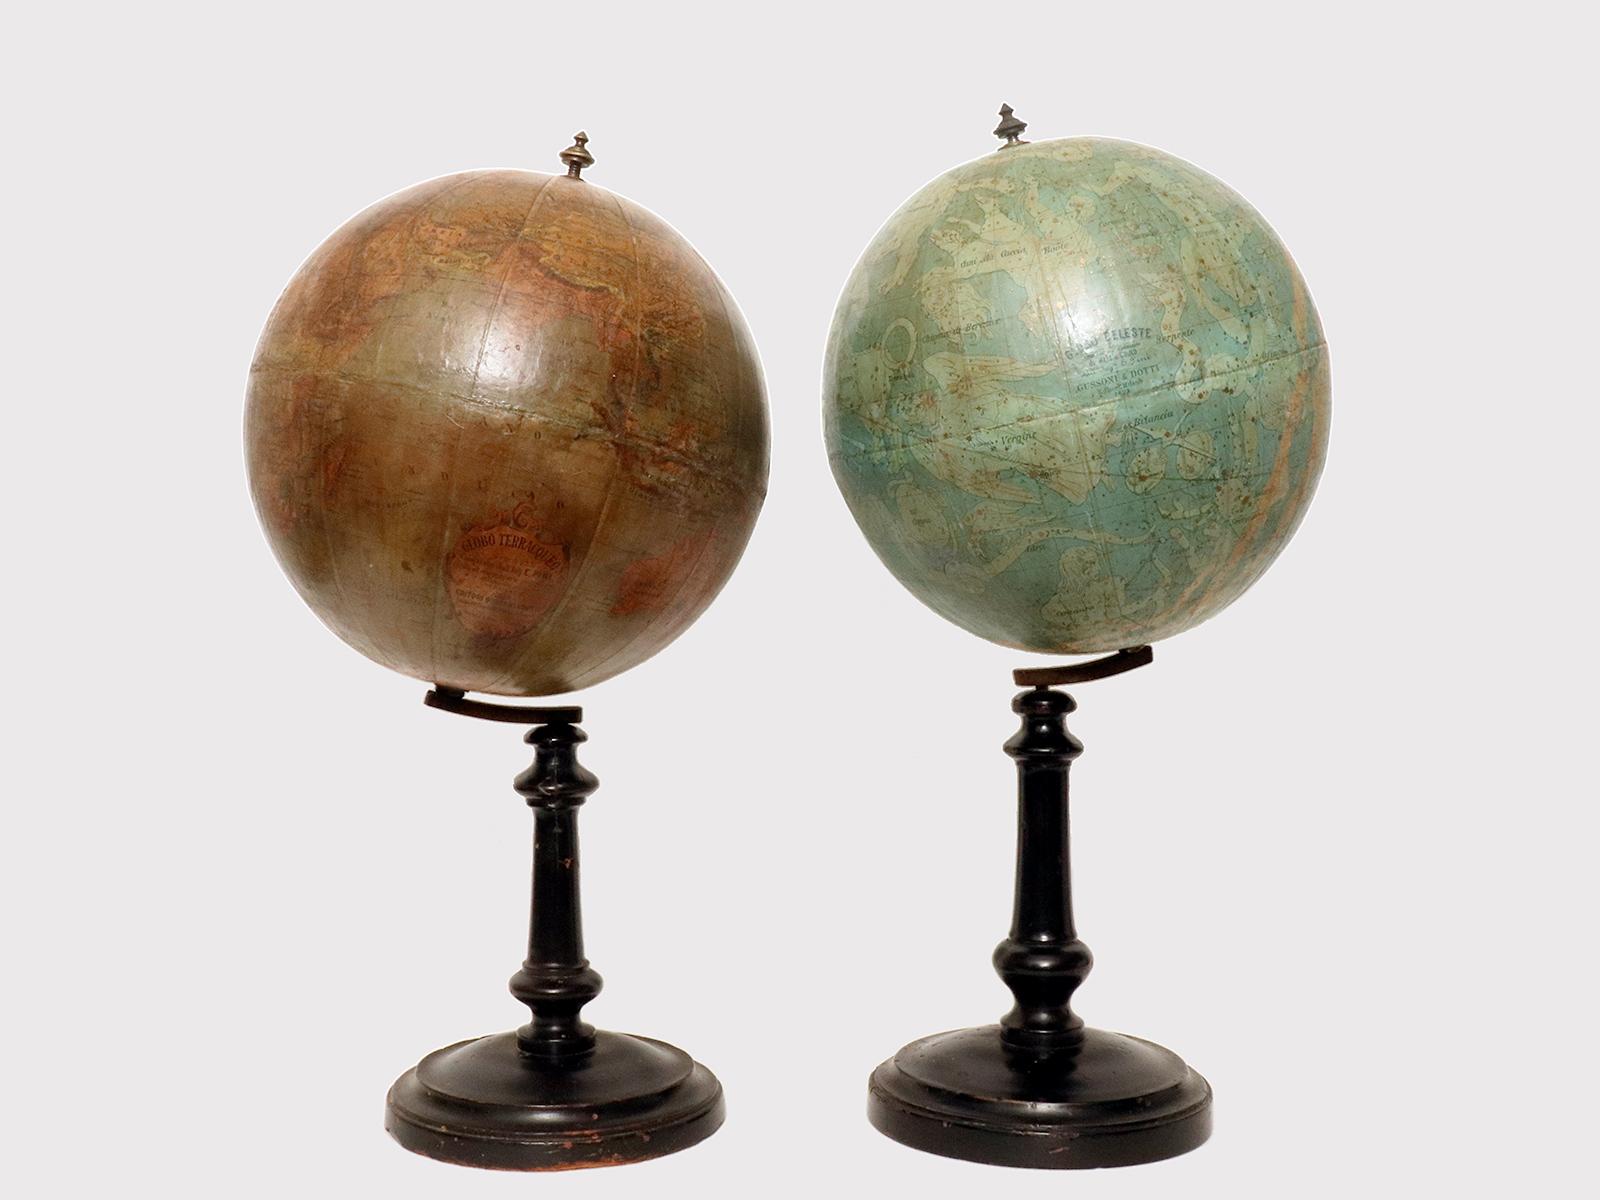 Pair of Italian globes. On an ebonized wooden base, worked on the lathe, with a circular foot and perfect patina, are placed: a celestial globe of 9,2 inches, compiled by the engineer E. Pini based on the catalogs of Heis and Gould, published by